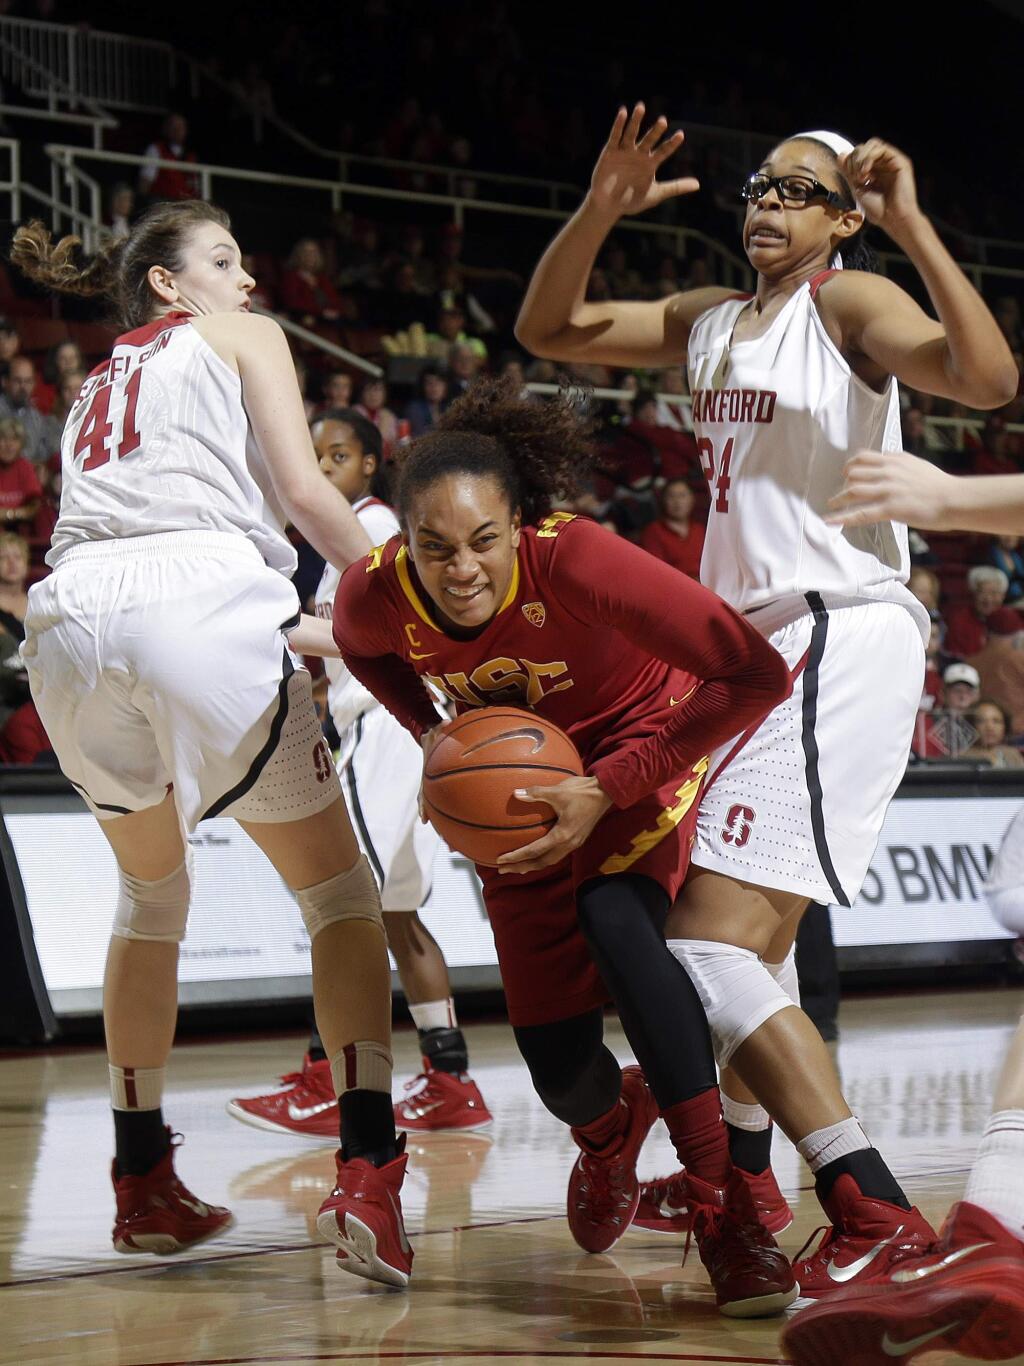 USC forward Alexyz Vaioletama squeezes between Stanford forward Bonnie Samuelson (41) and forward Erica McCall during the first half of a game Friday, Feb. 13, 2015, in Stanford. (AP Photo/Marcio Jose Sanchez)